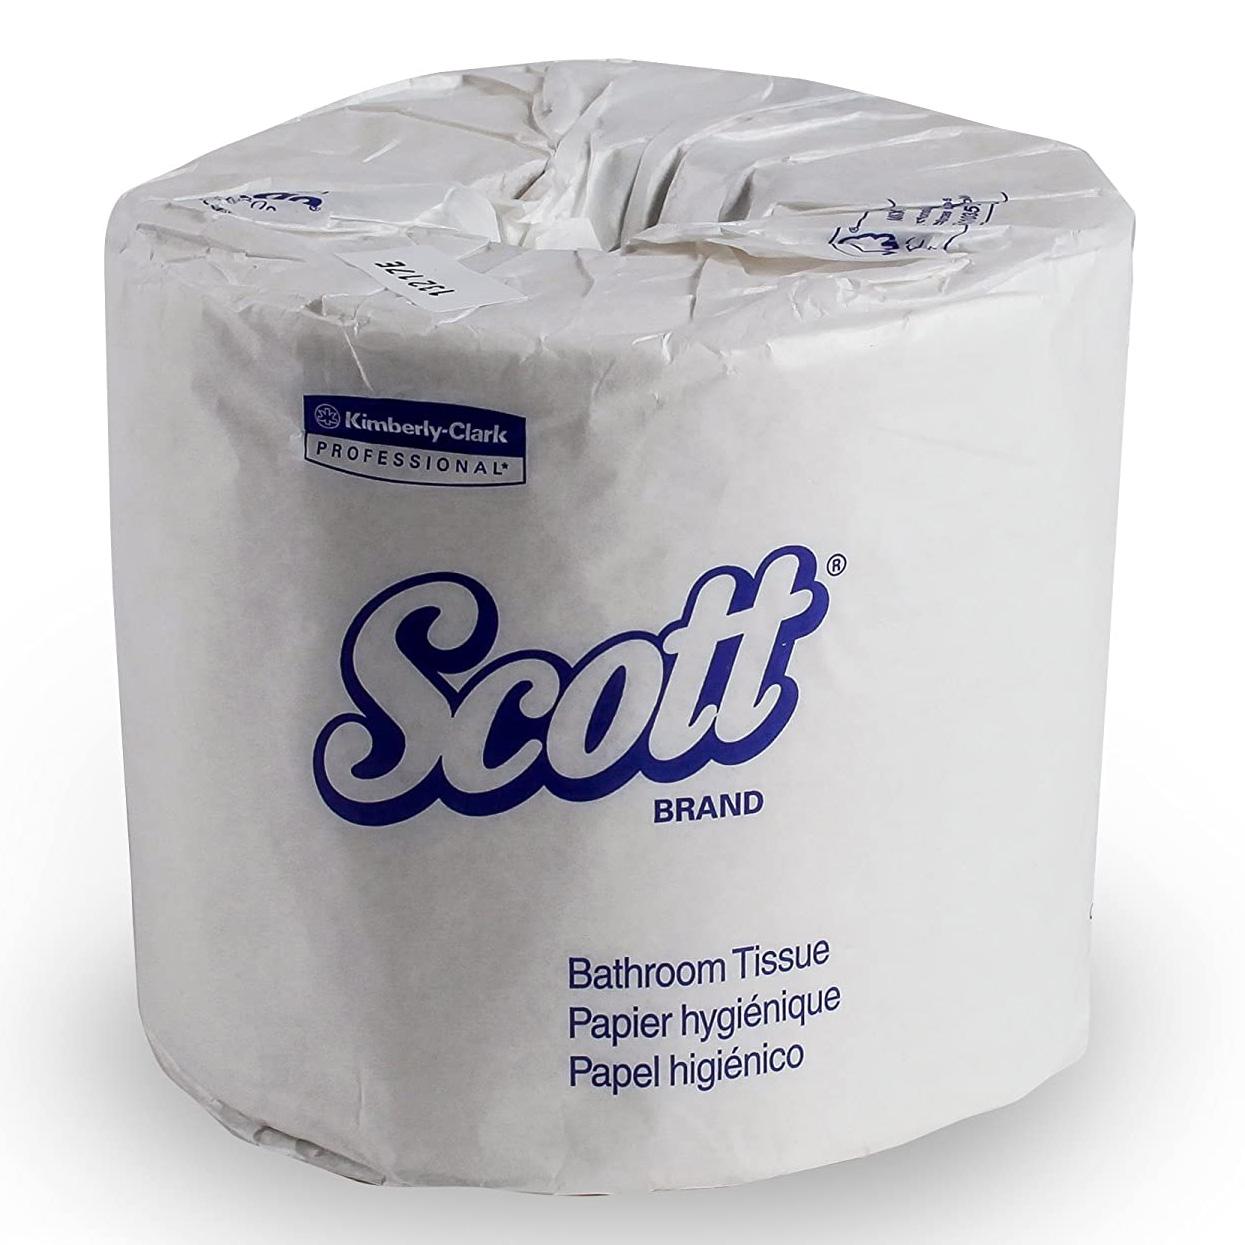 80 Scott Essential Professional Recycled Fiber Toilet Papers for $37.86 Shipped